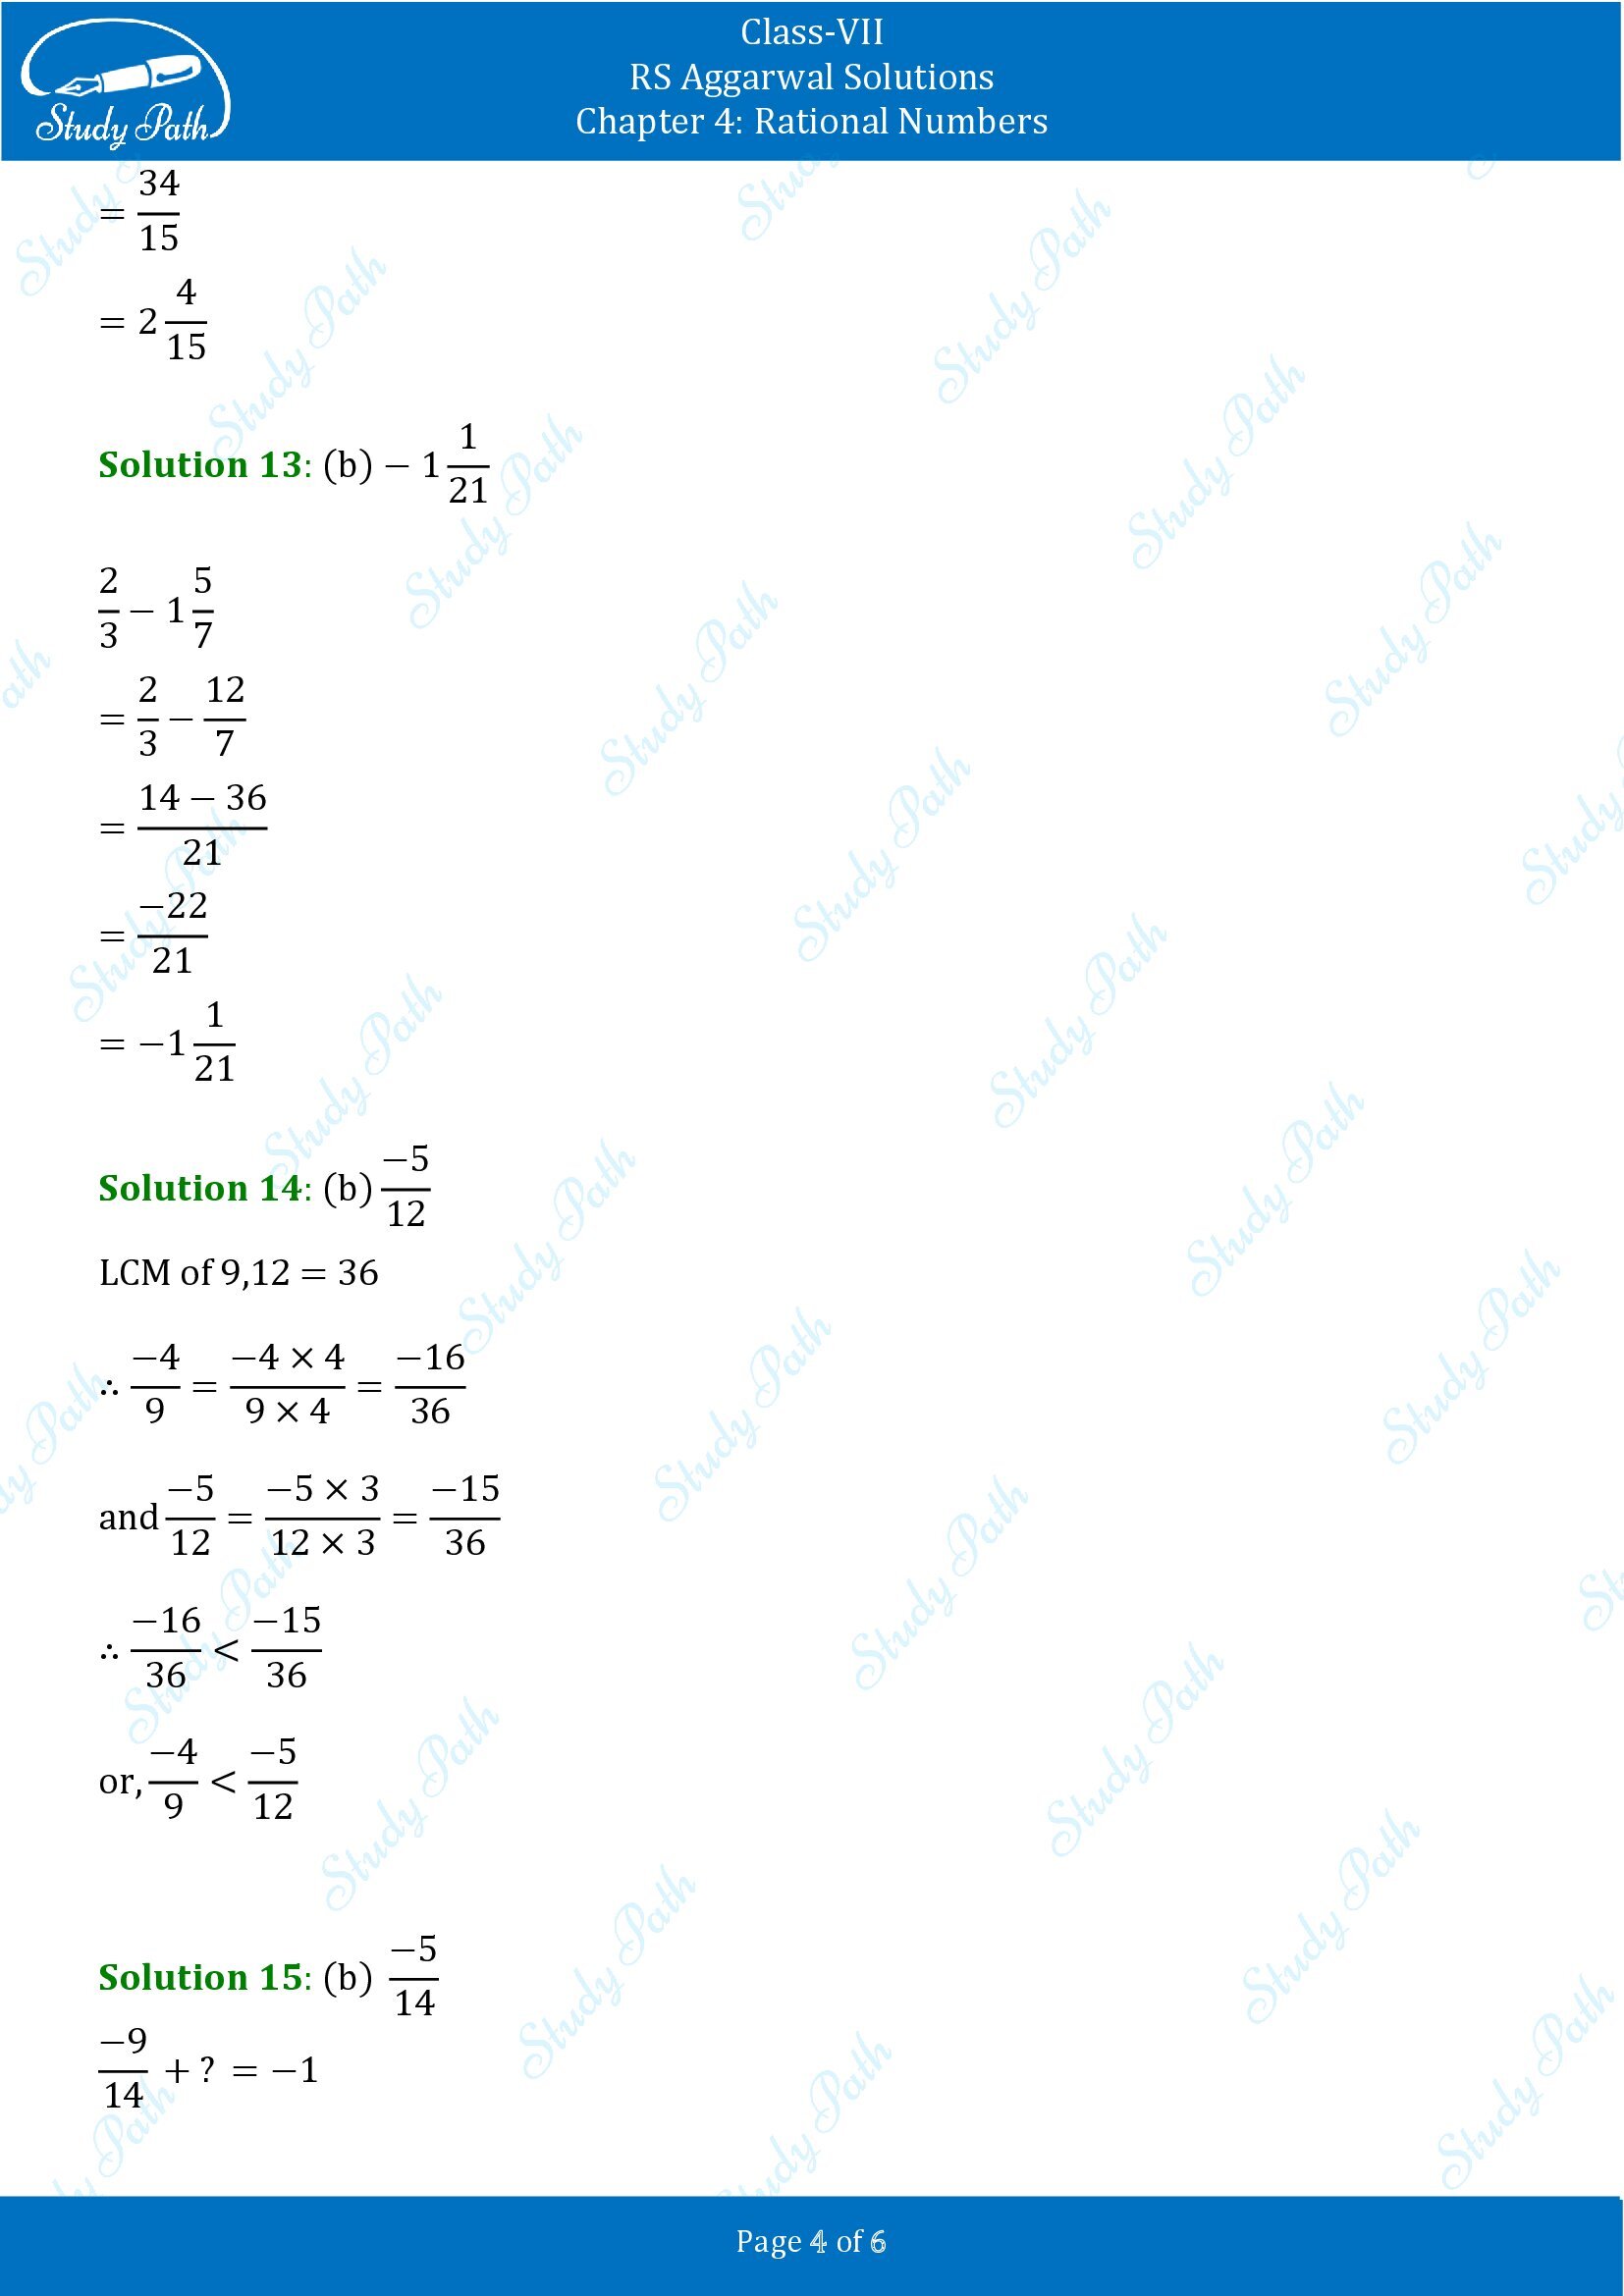 RS Aggarwal Solutions Class 7 Chapter 4 Rational Numbers Exercise 4G MCQ 0004